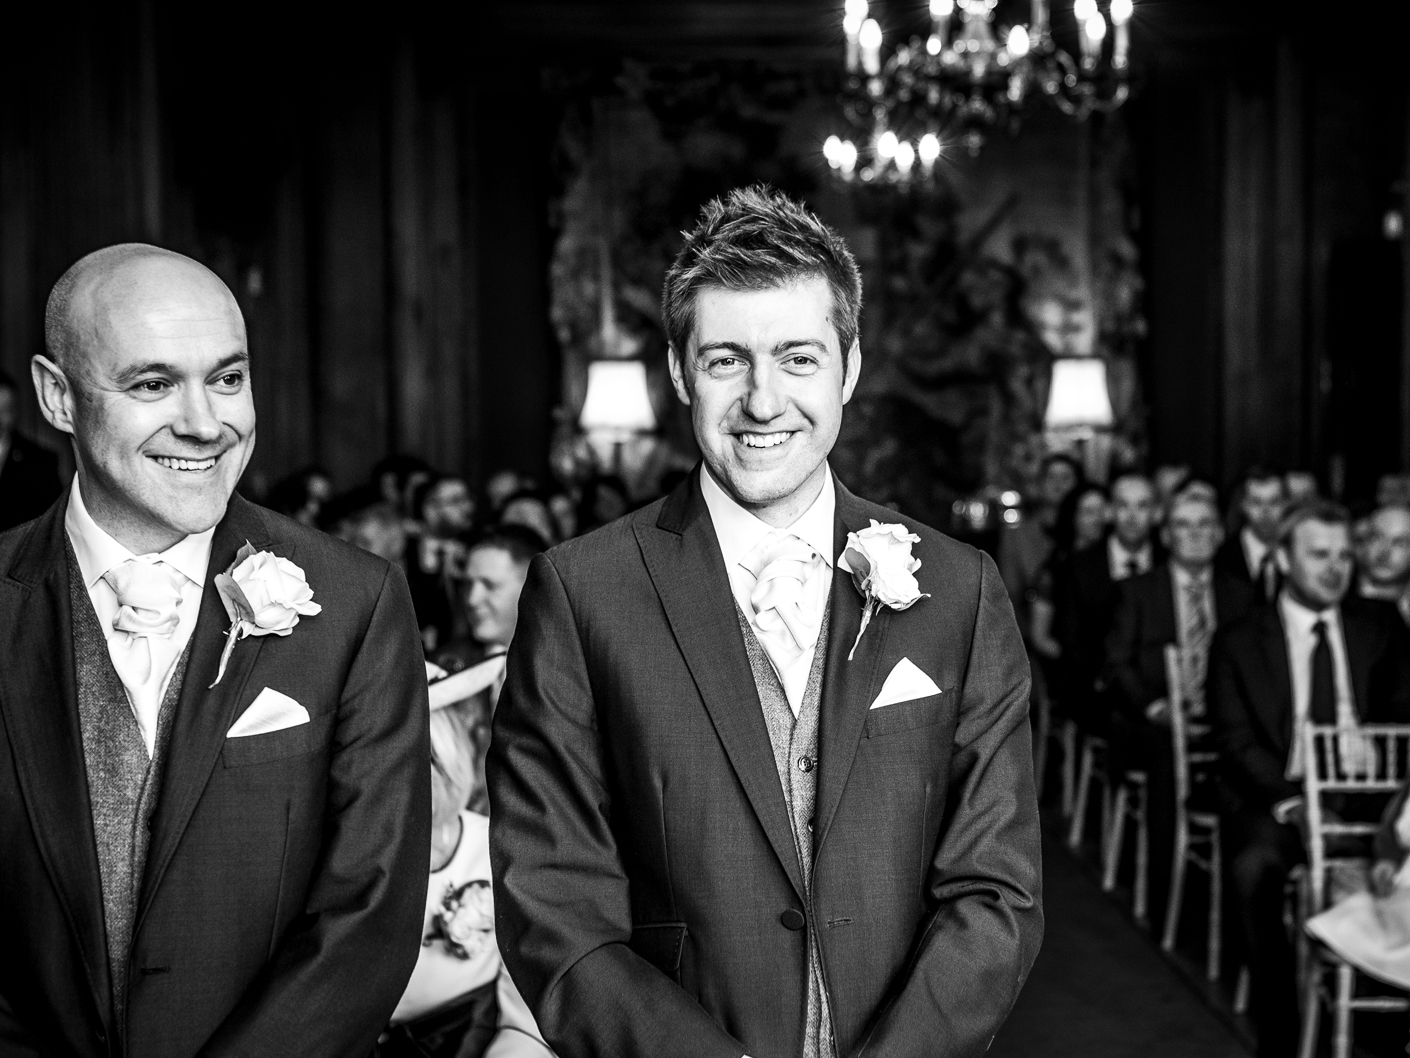 wedding-photography-of-the-groom-and-bestman